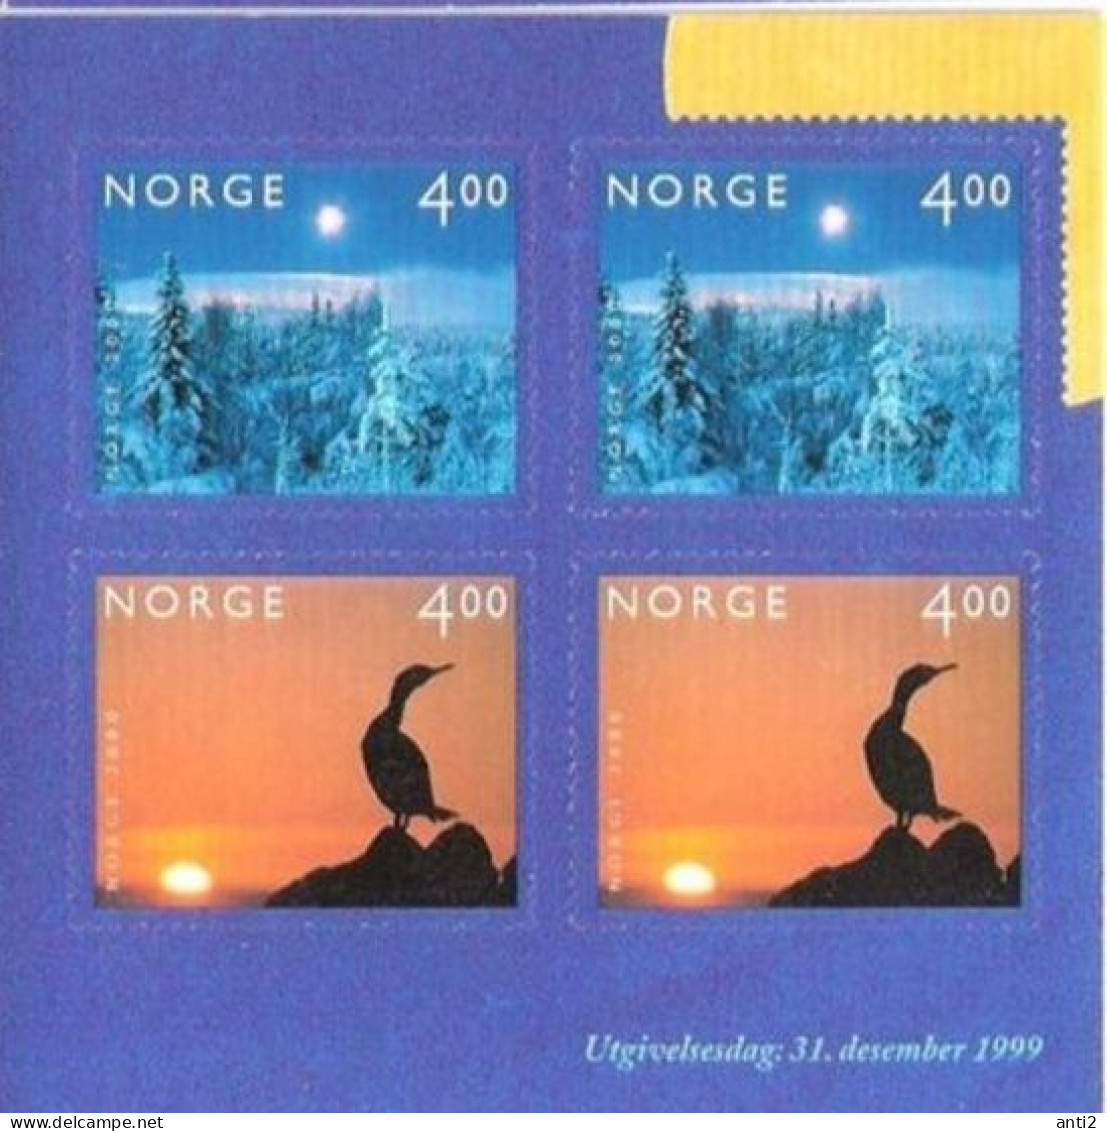 Norge Norway 1999 Millennium (III). Bird And Winter, Mi 1335-1336 From Booklet,  MNH(**) - Unused Stamps